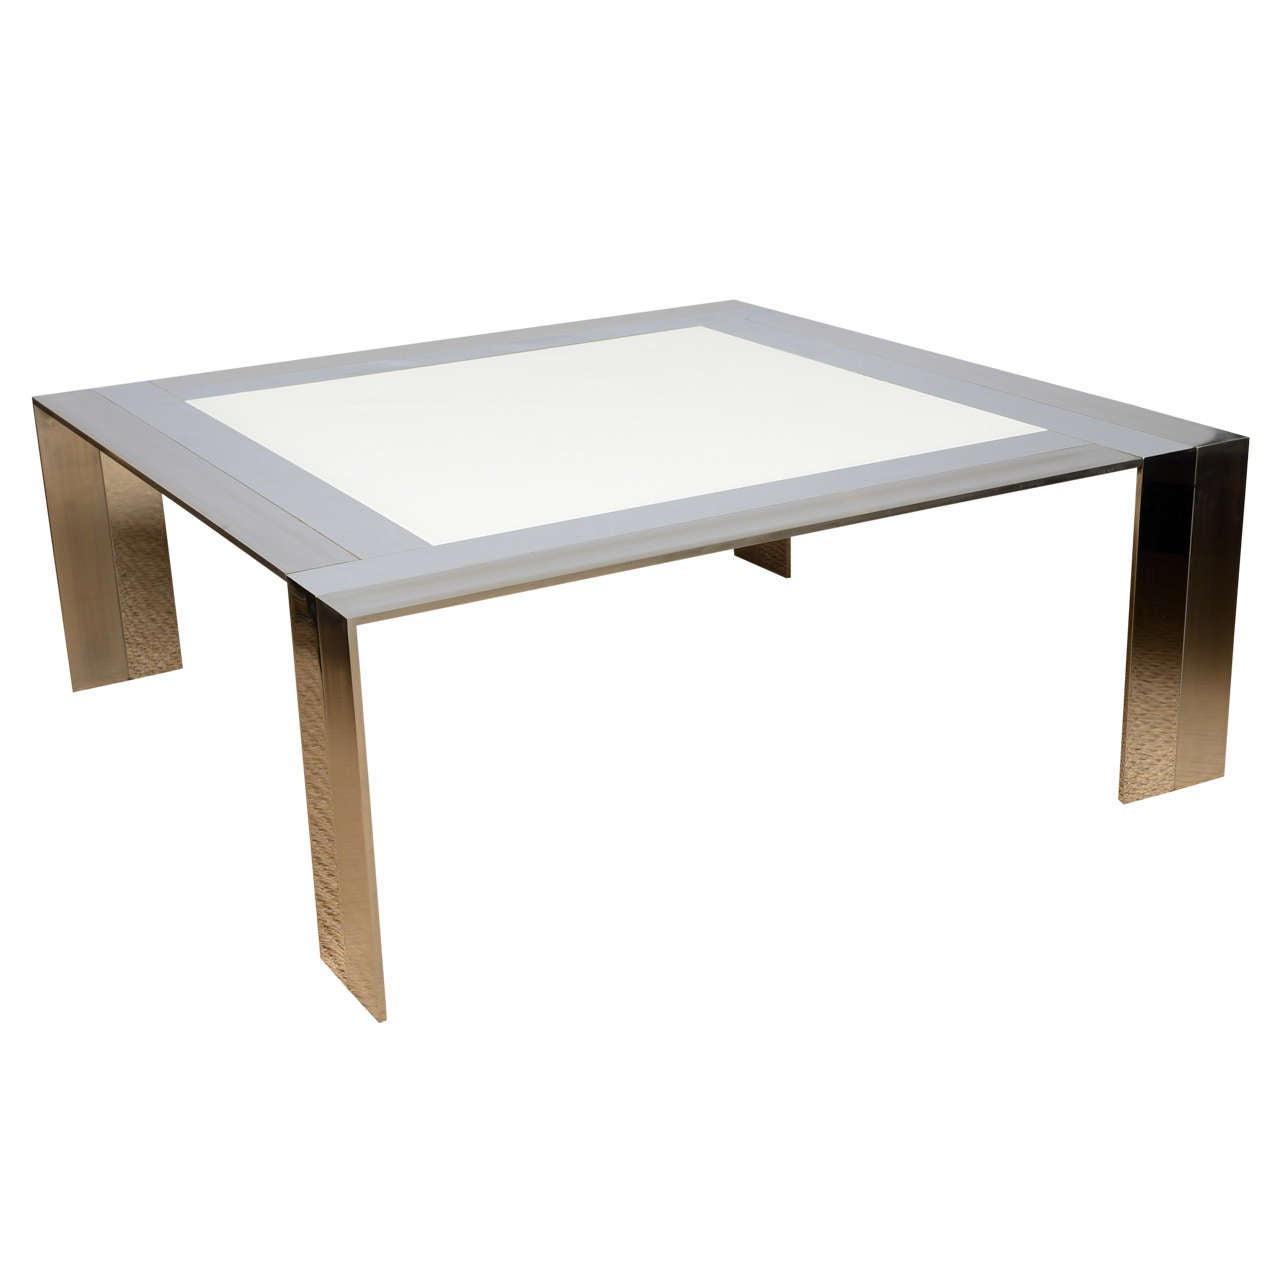 Italian Vintage Stainless Steel and White Glass Square Cocktail Table